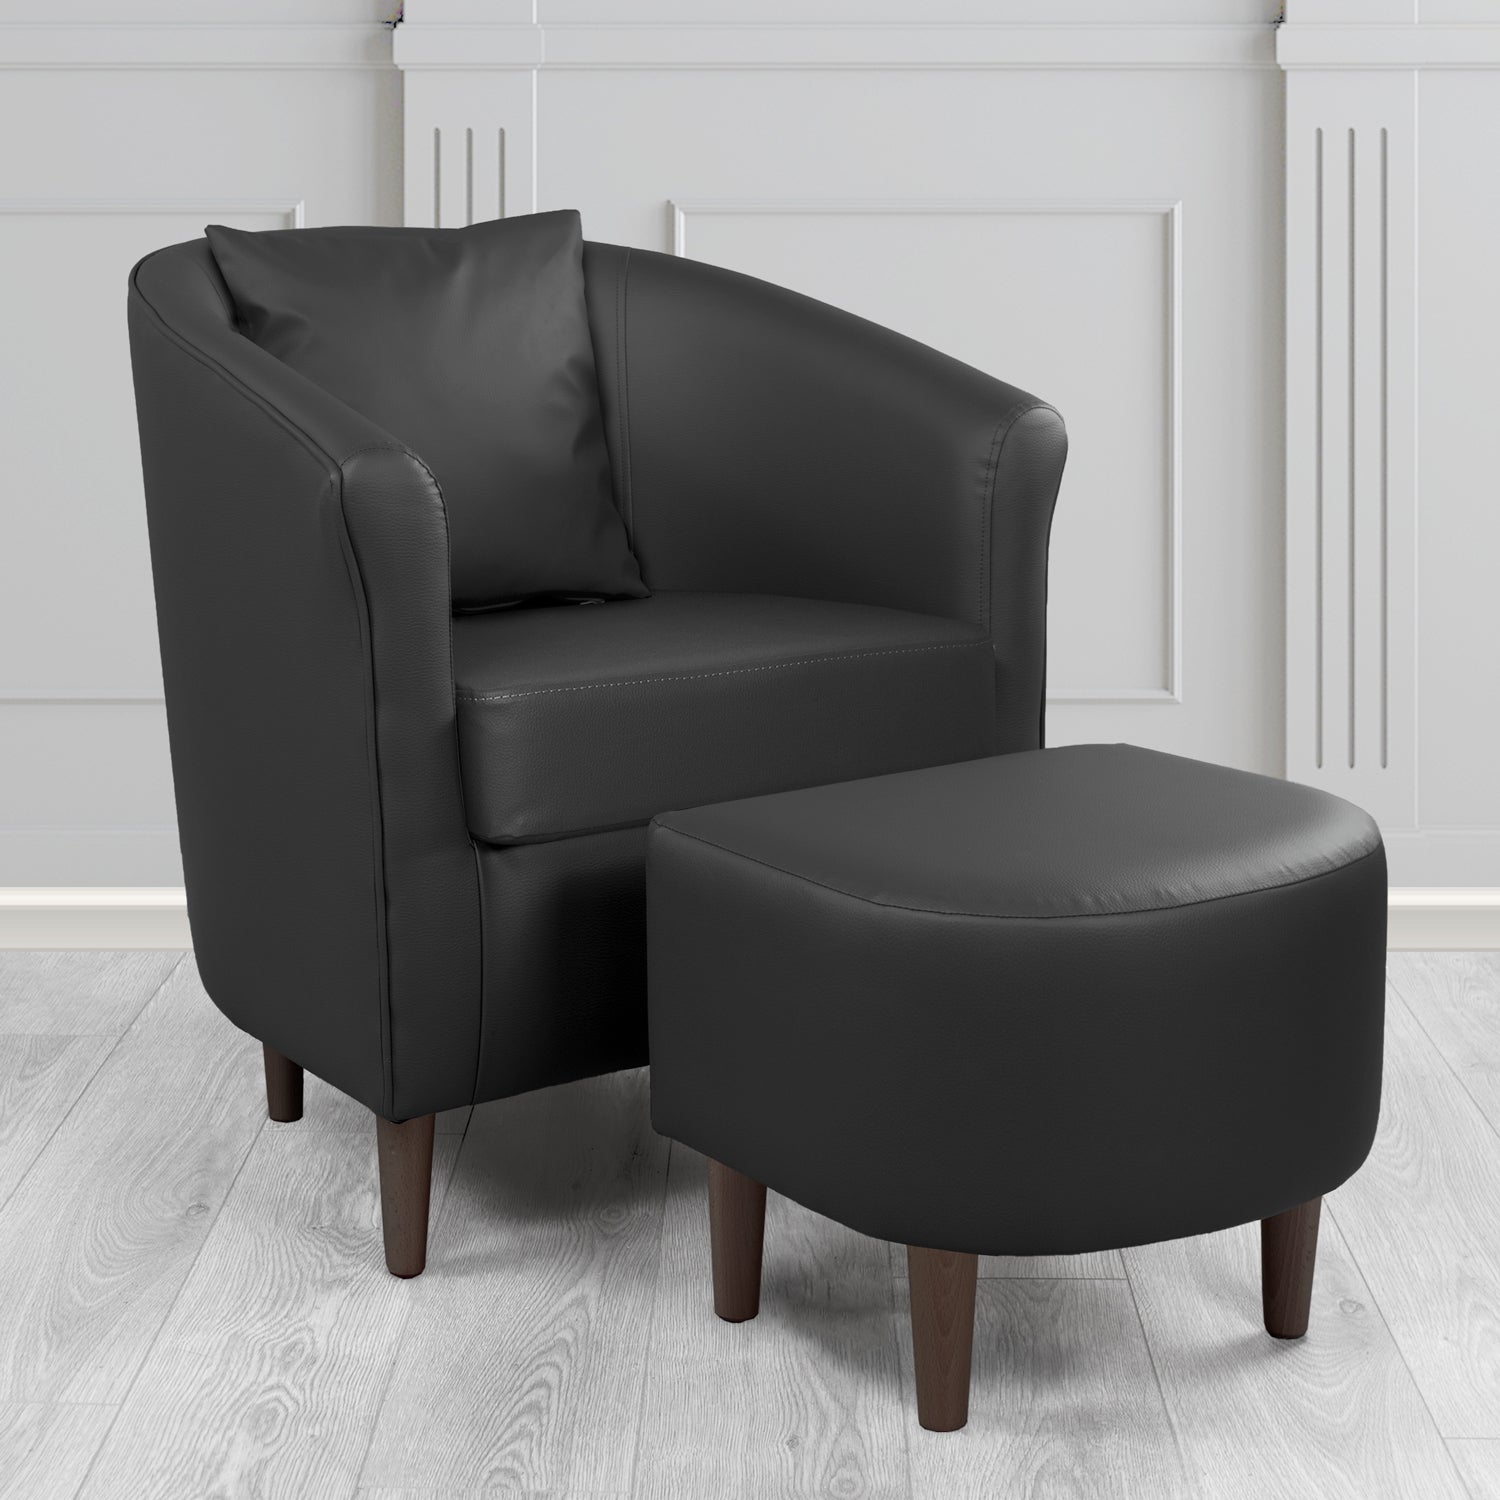 St Tropez Tub Chair with Footstool Set in Madrid Black Faux Leather - The Tub Chair Shop